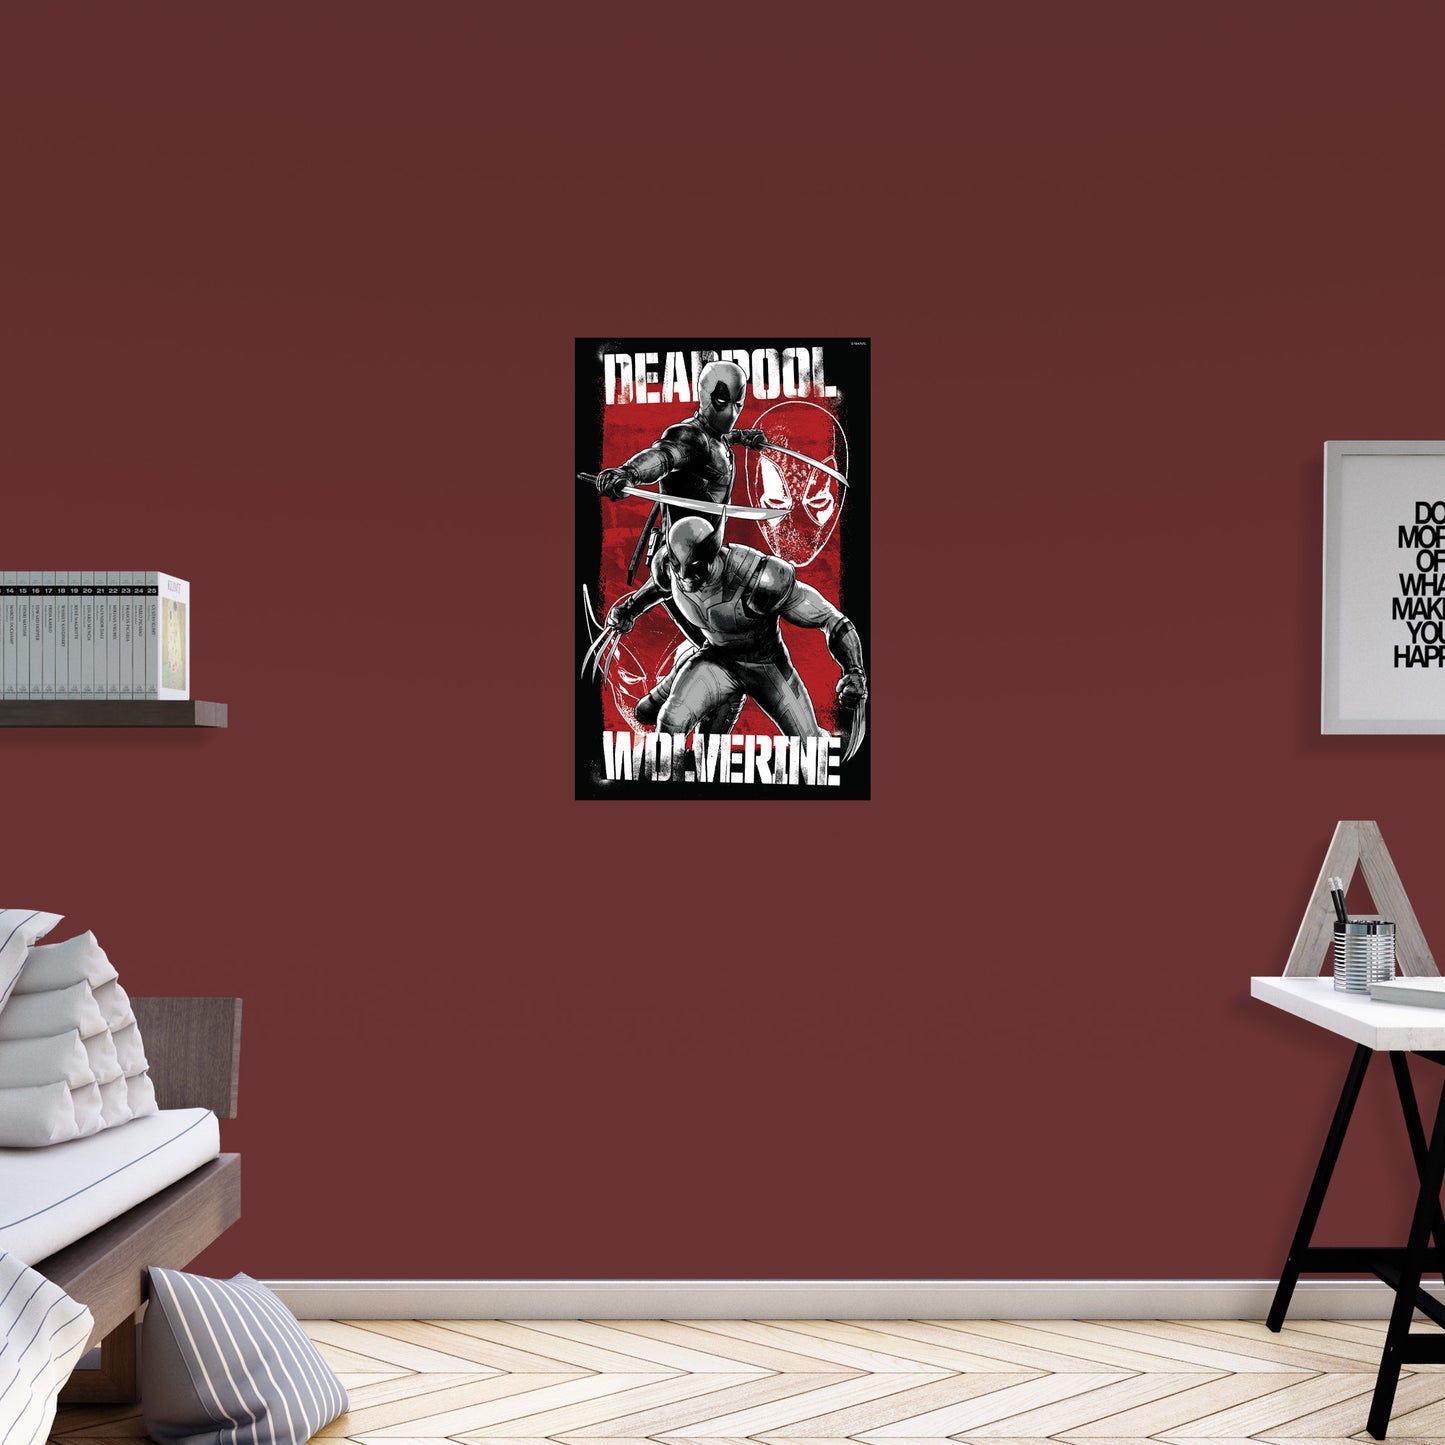 Deadpool & Wolverine: Deadpool & Wolverine Stencil Poster        - Officially Licensed Marvel Removable     Adhesive Decal